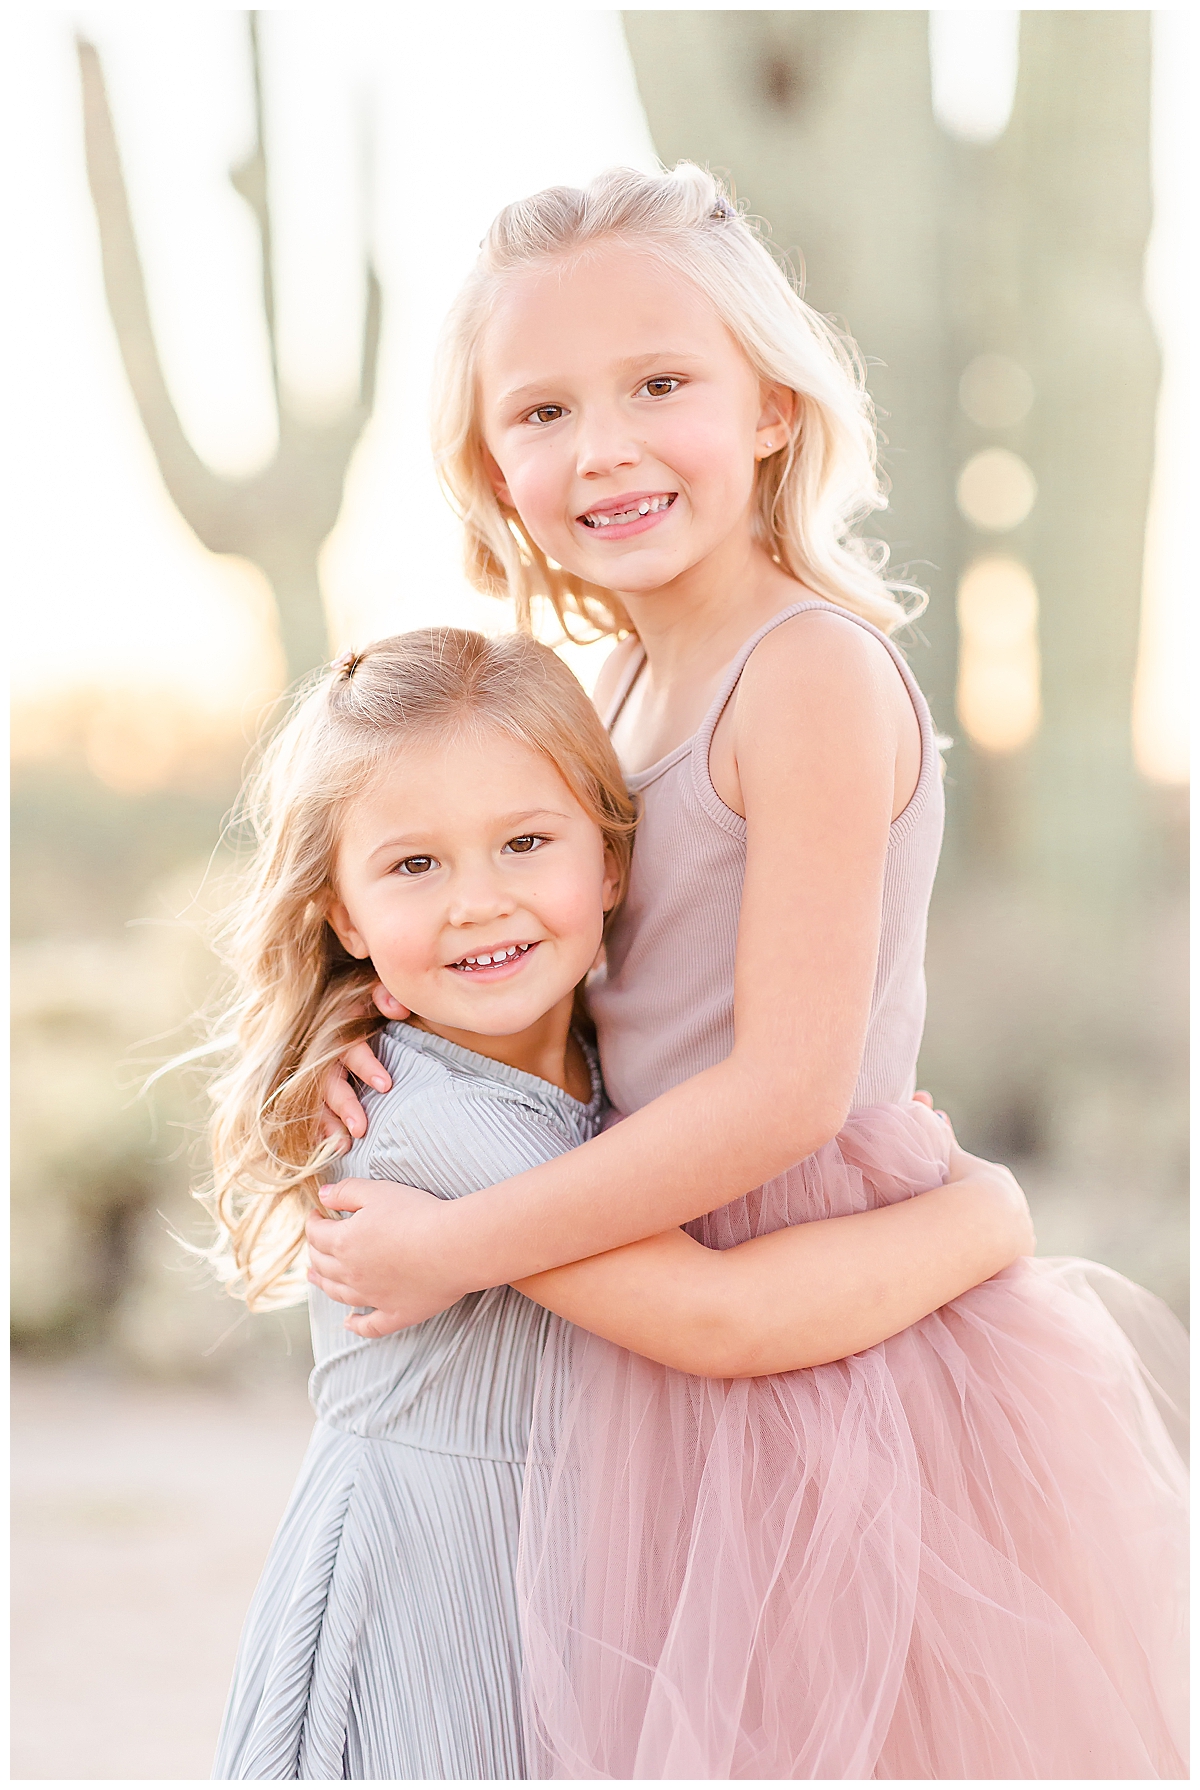 Portrait of sisters in the desert in Scottsdale, AZ photographed by Christine Deaton Creative